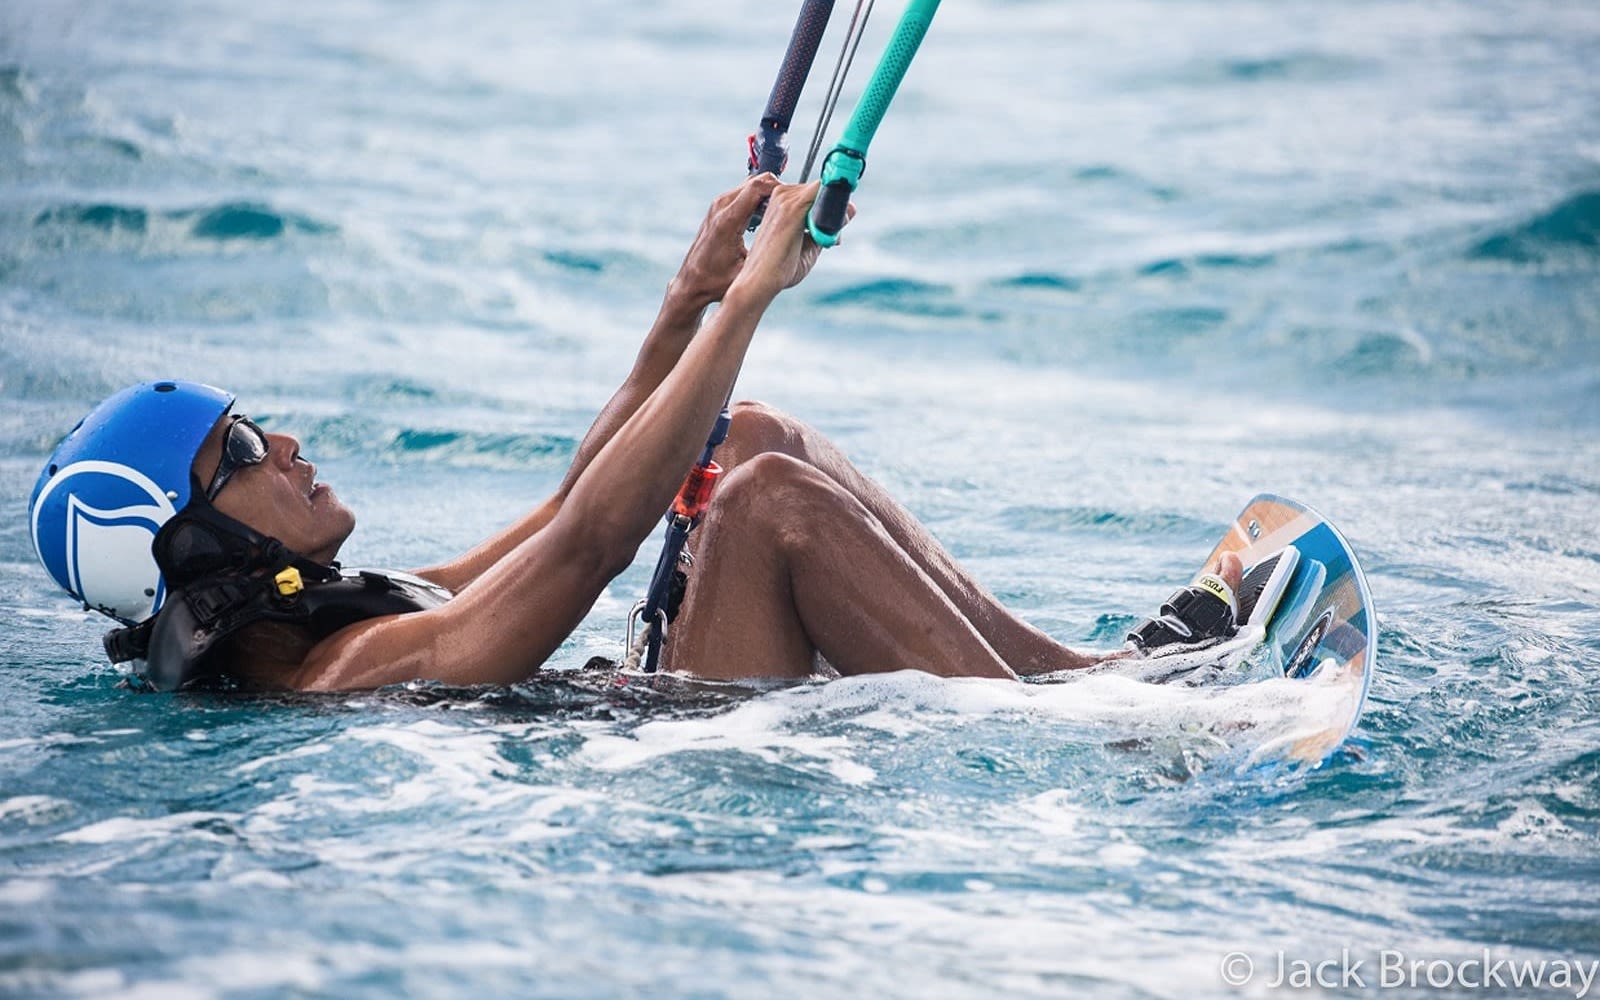 Barack Obama in the sea holding on to a handle of a kitesurf as he is about to be pulled out of the water by the kite